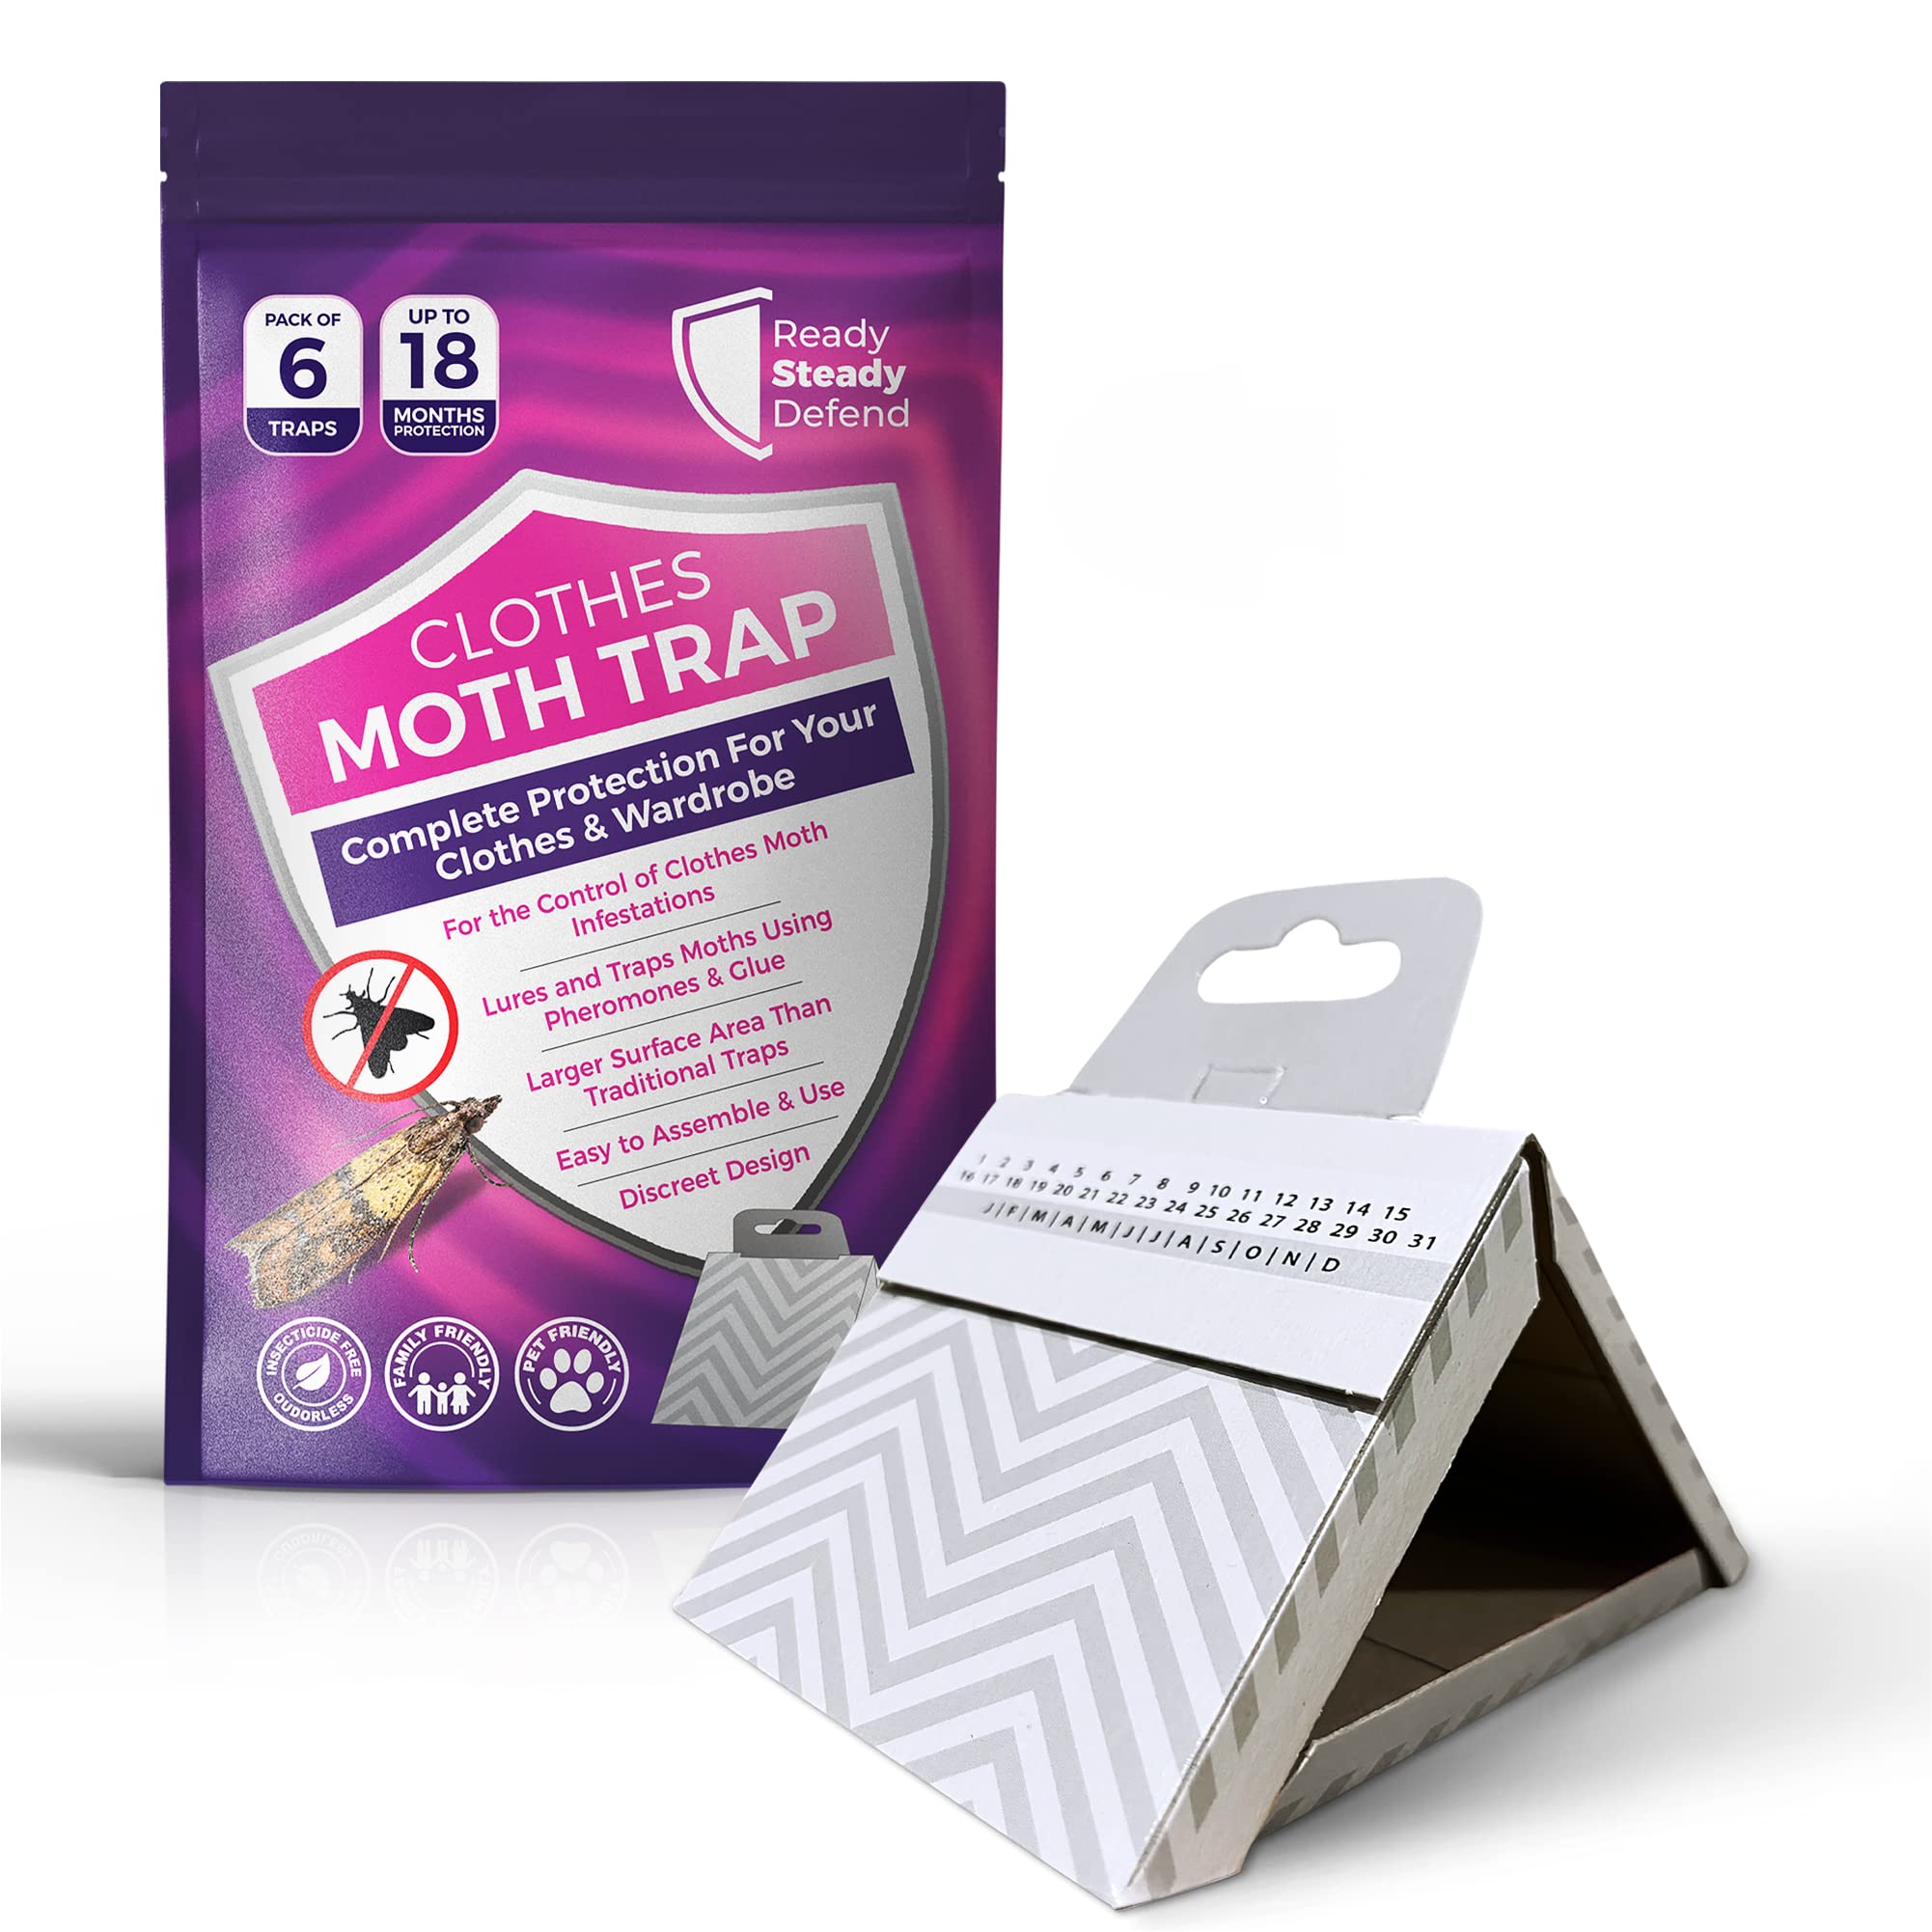 Clothes Moth Trap (Pack of 6 Traps)